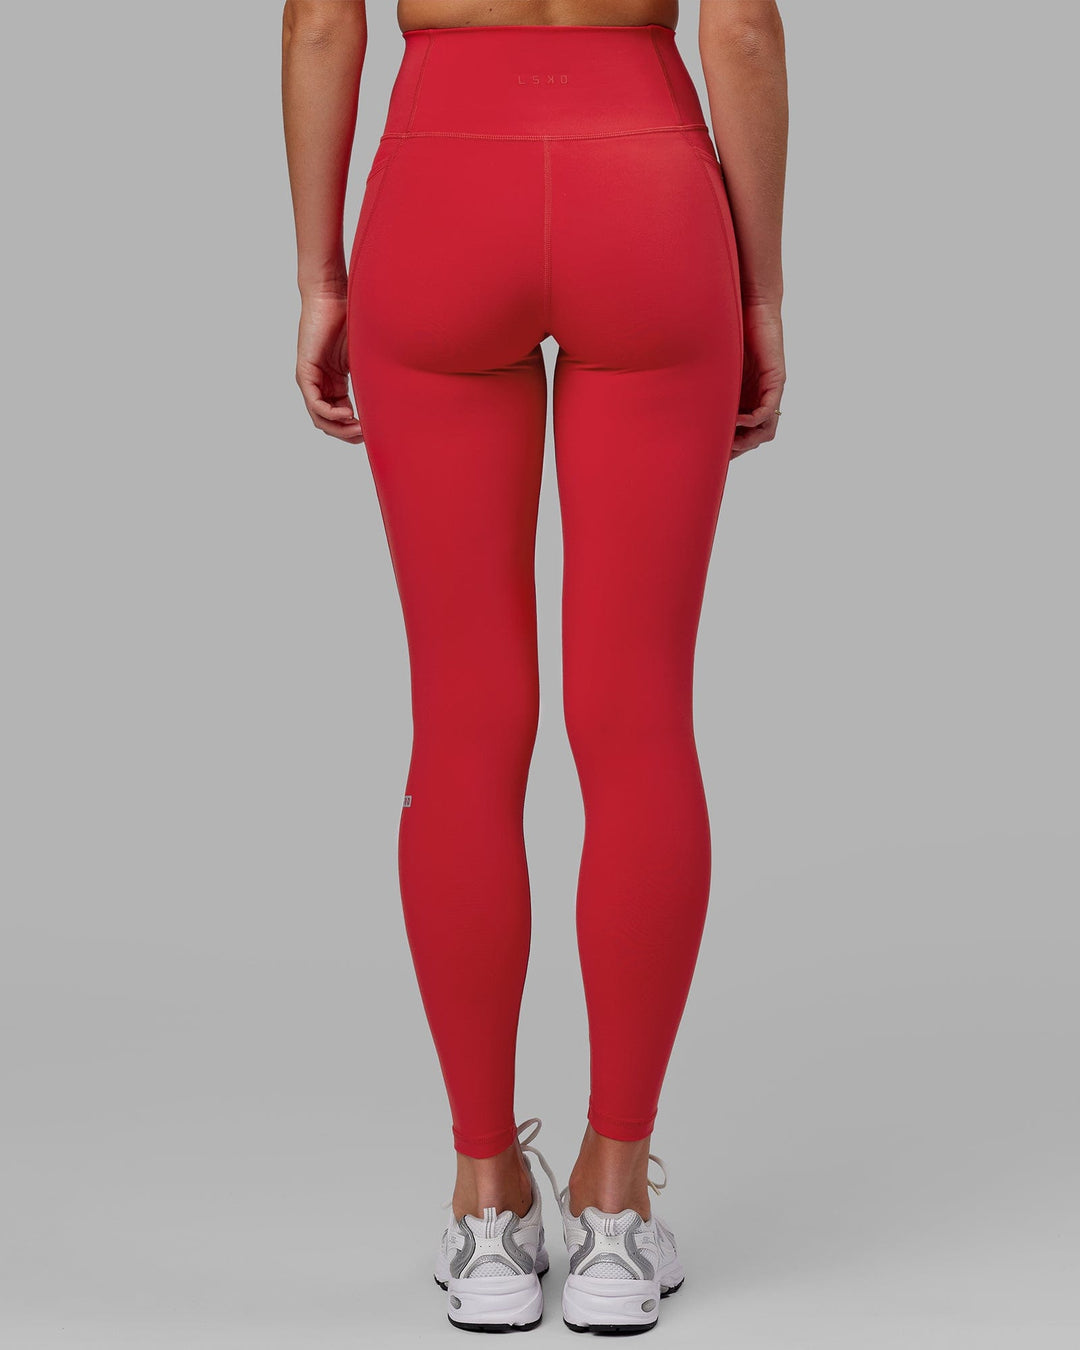 Woman wearing Fusion Full Length Tight - Scarlet